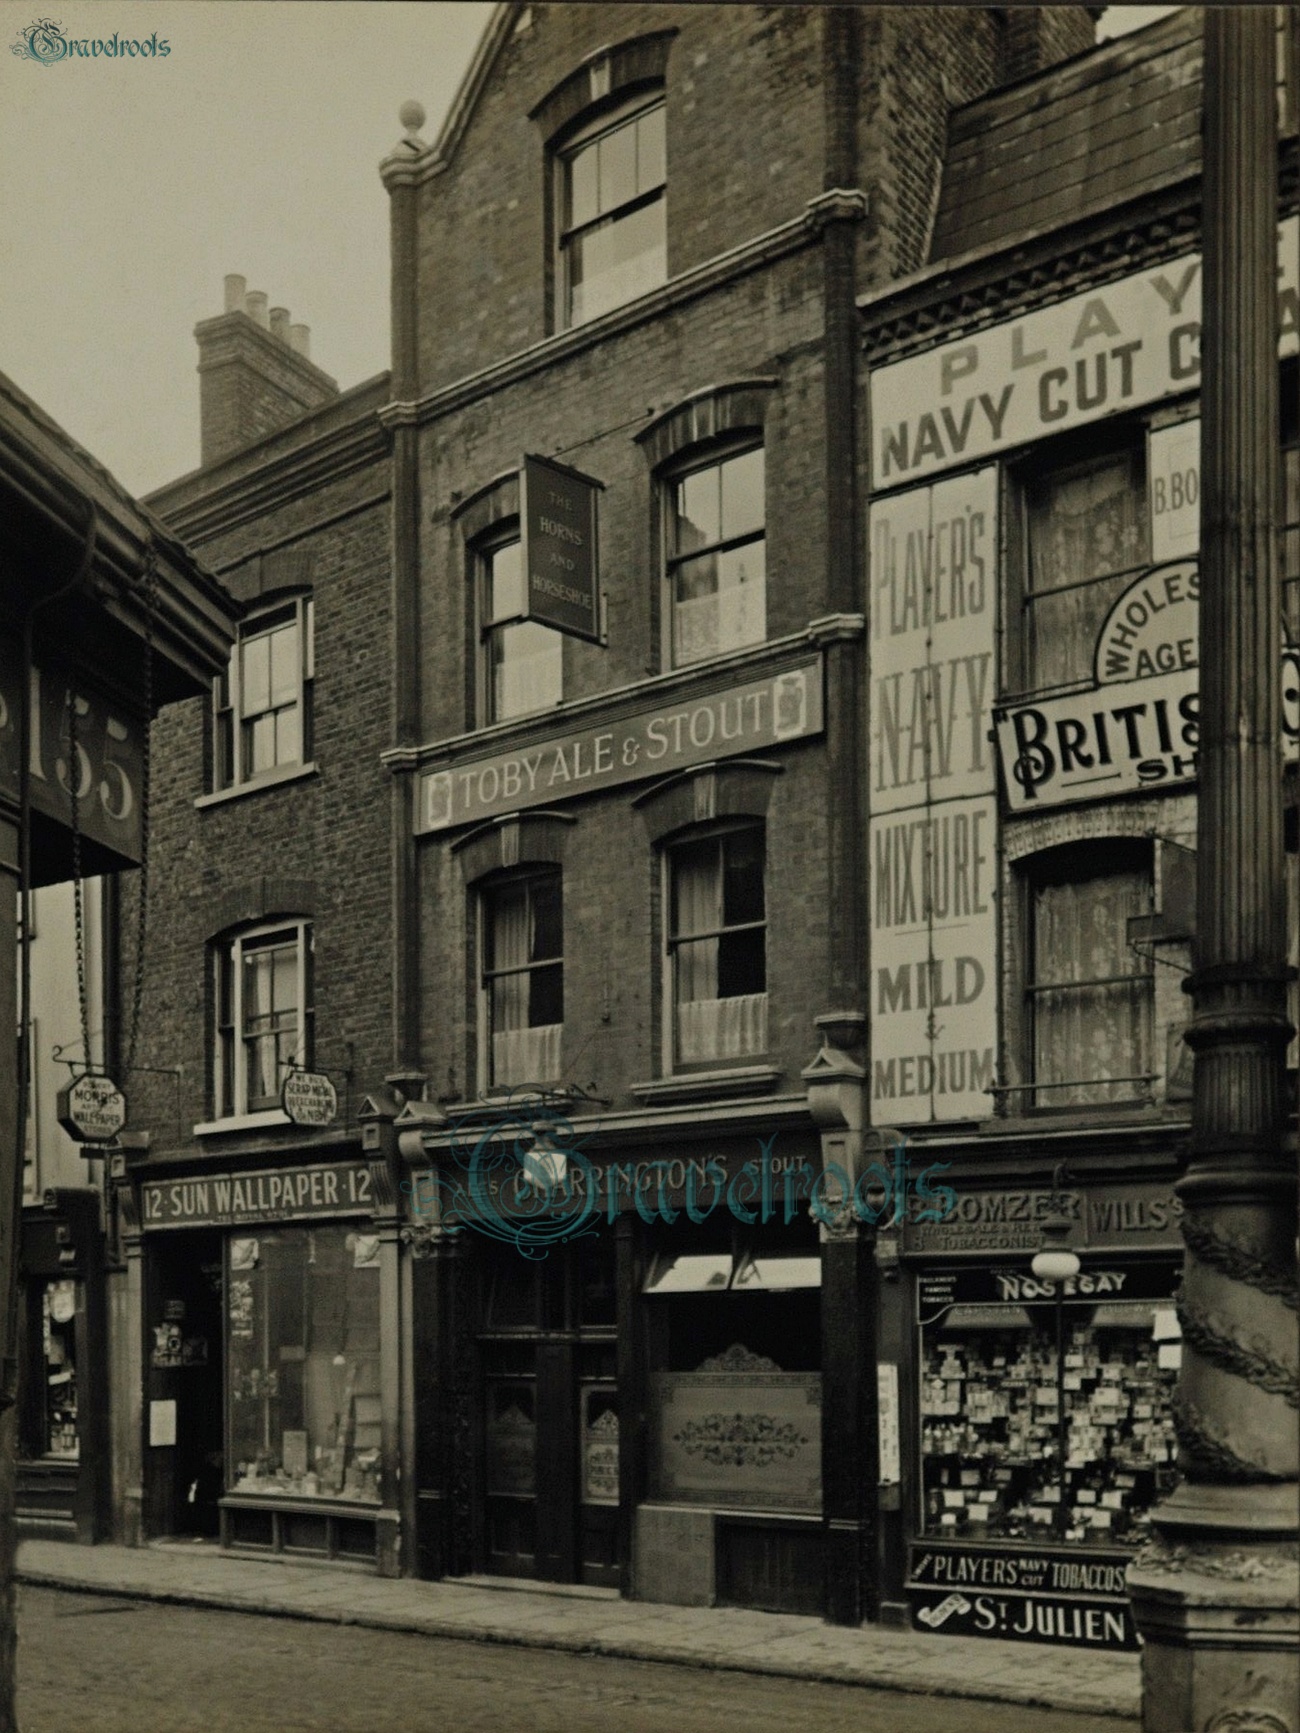  old photos of Horns & Horseshoe pub, 10 Cable Street, Wapping, London,  - click image below to return